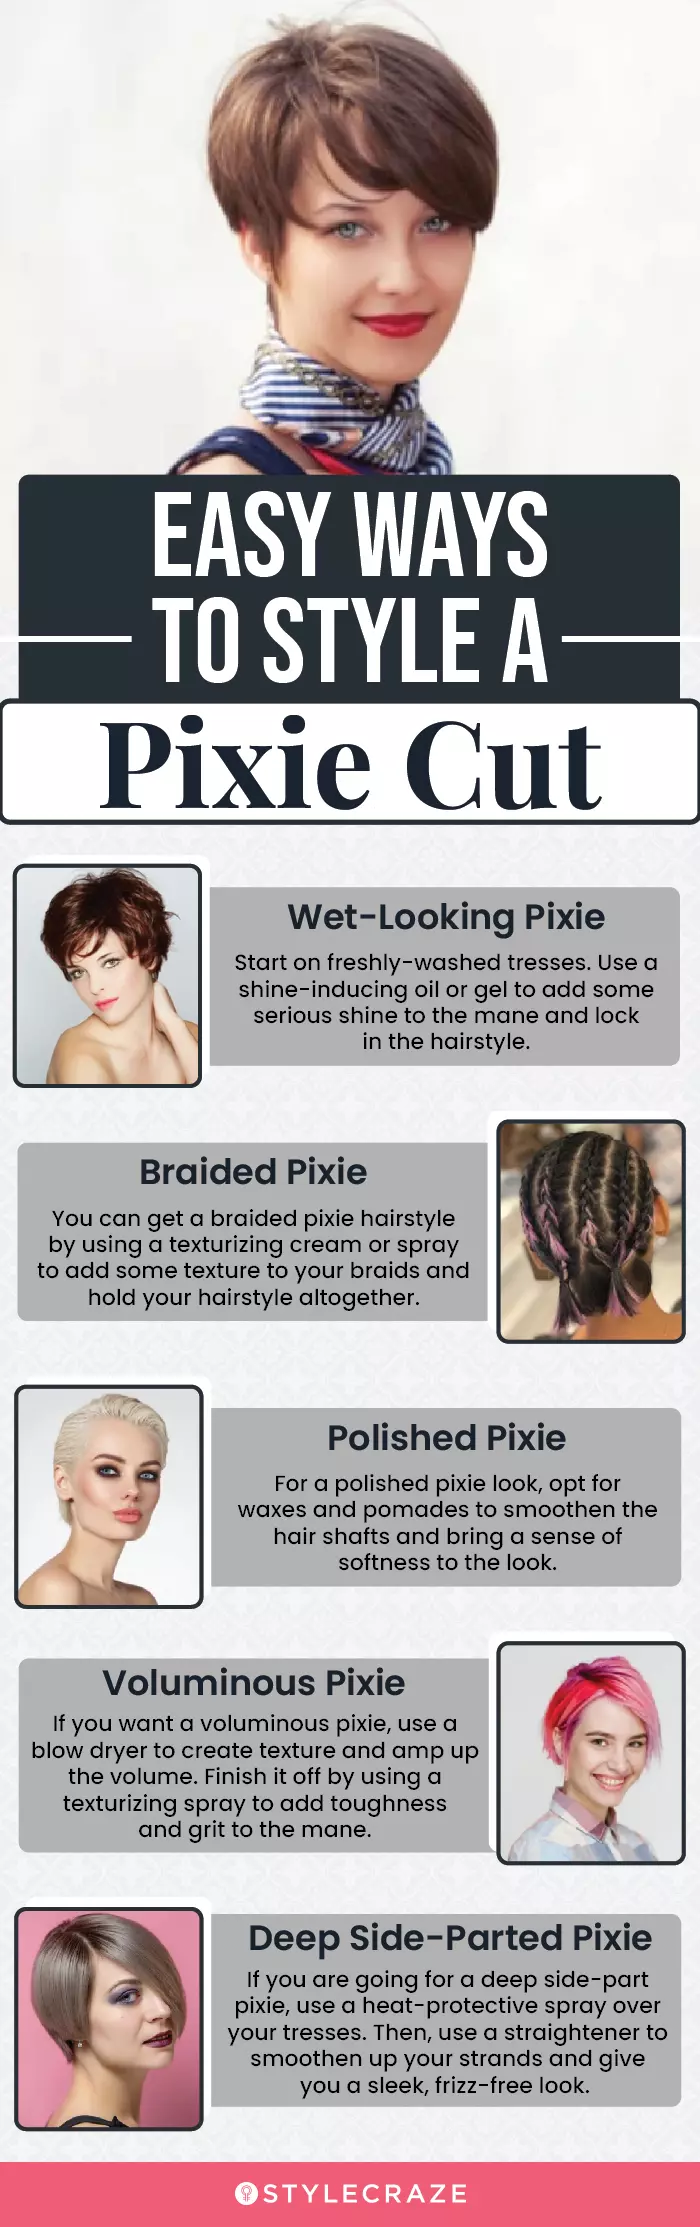 Easy Ways To Style Pixie Cut (infographic)